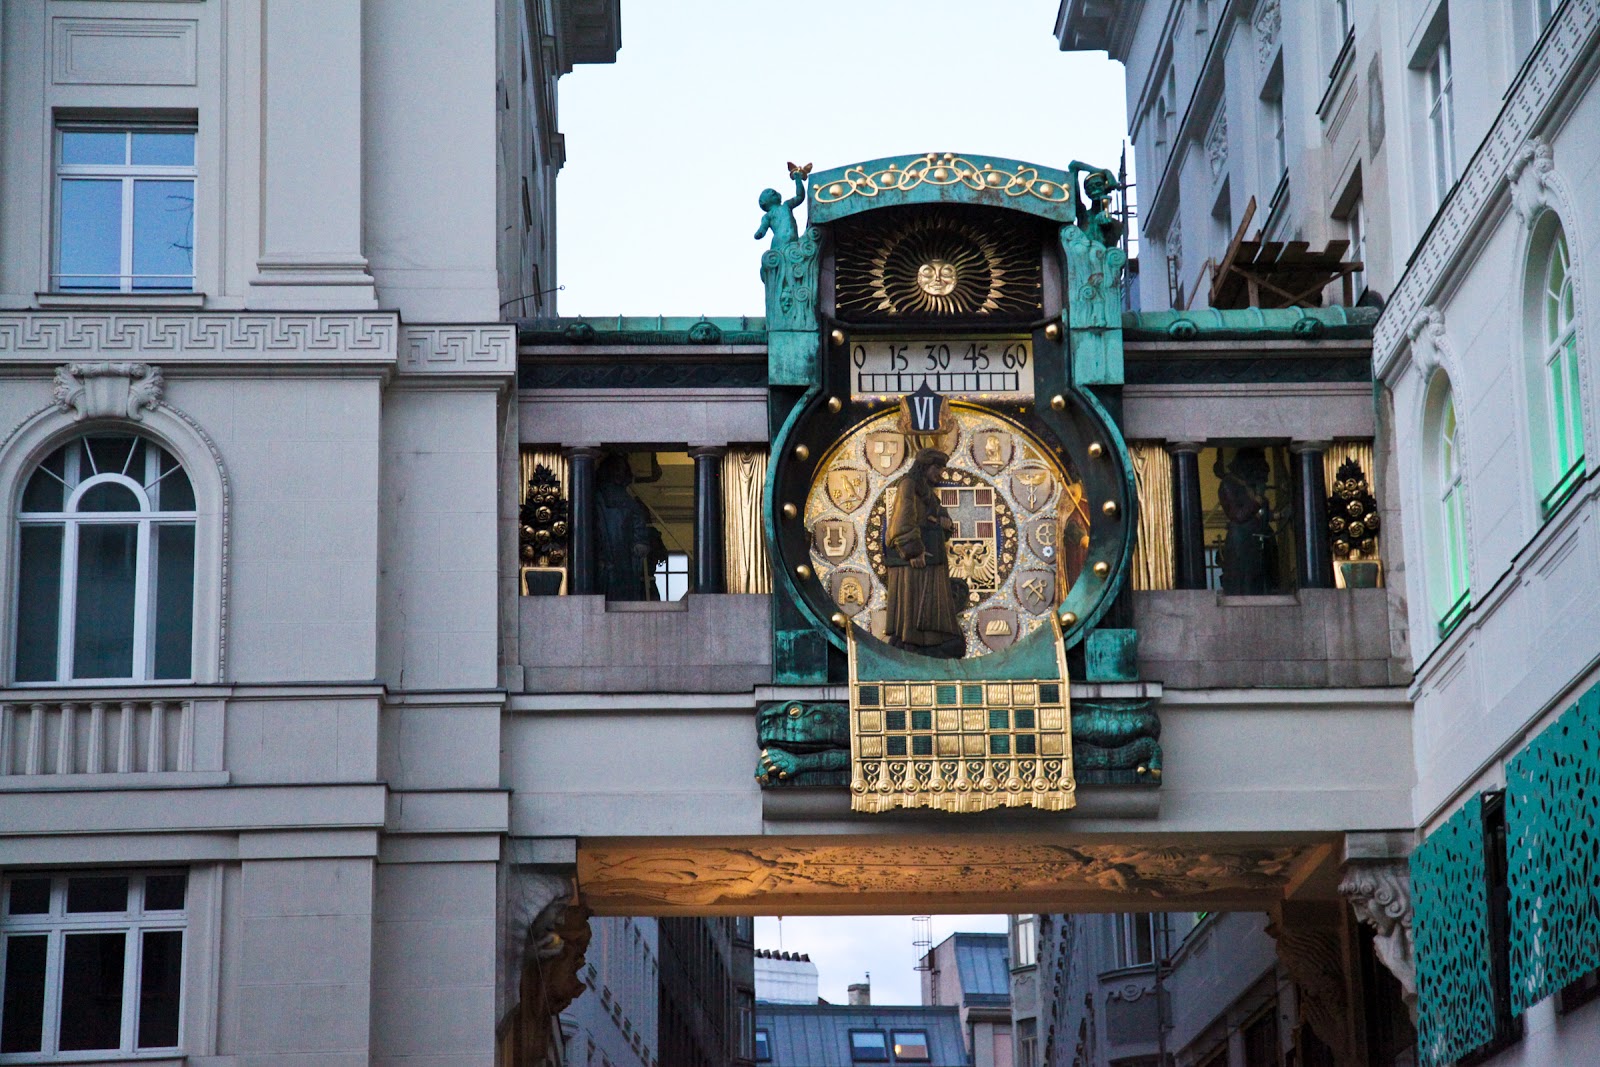 Vienna Art Nouveau: Otto Wagner and the City Trains Walk with a Historian